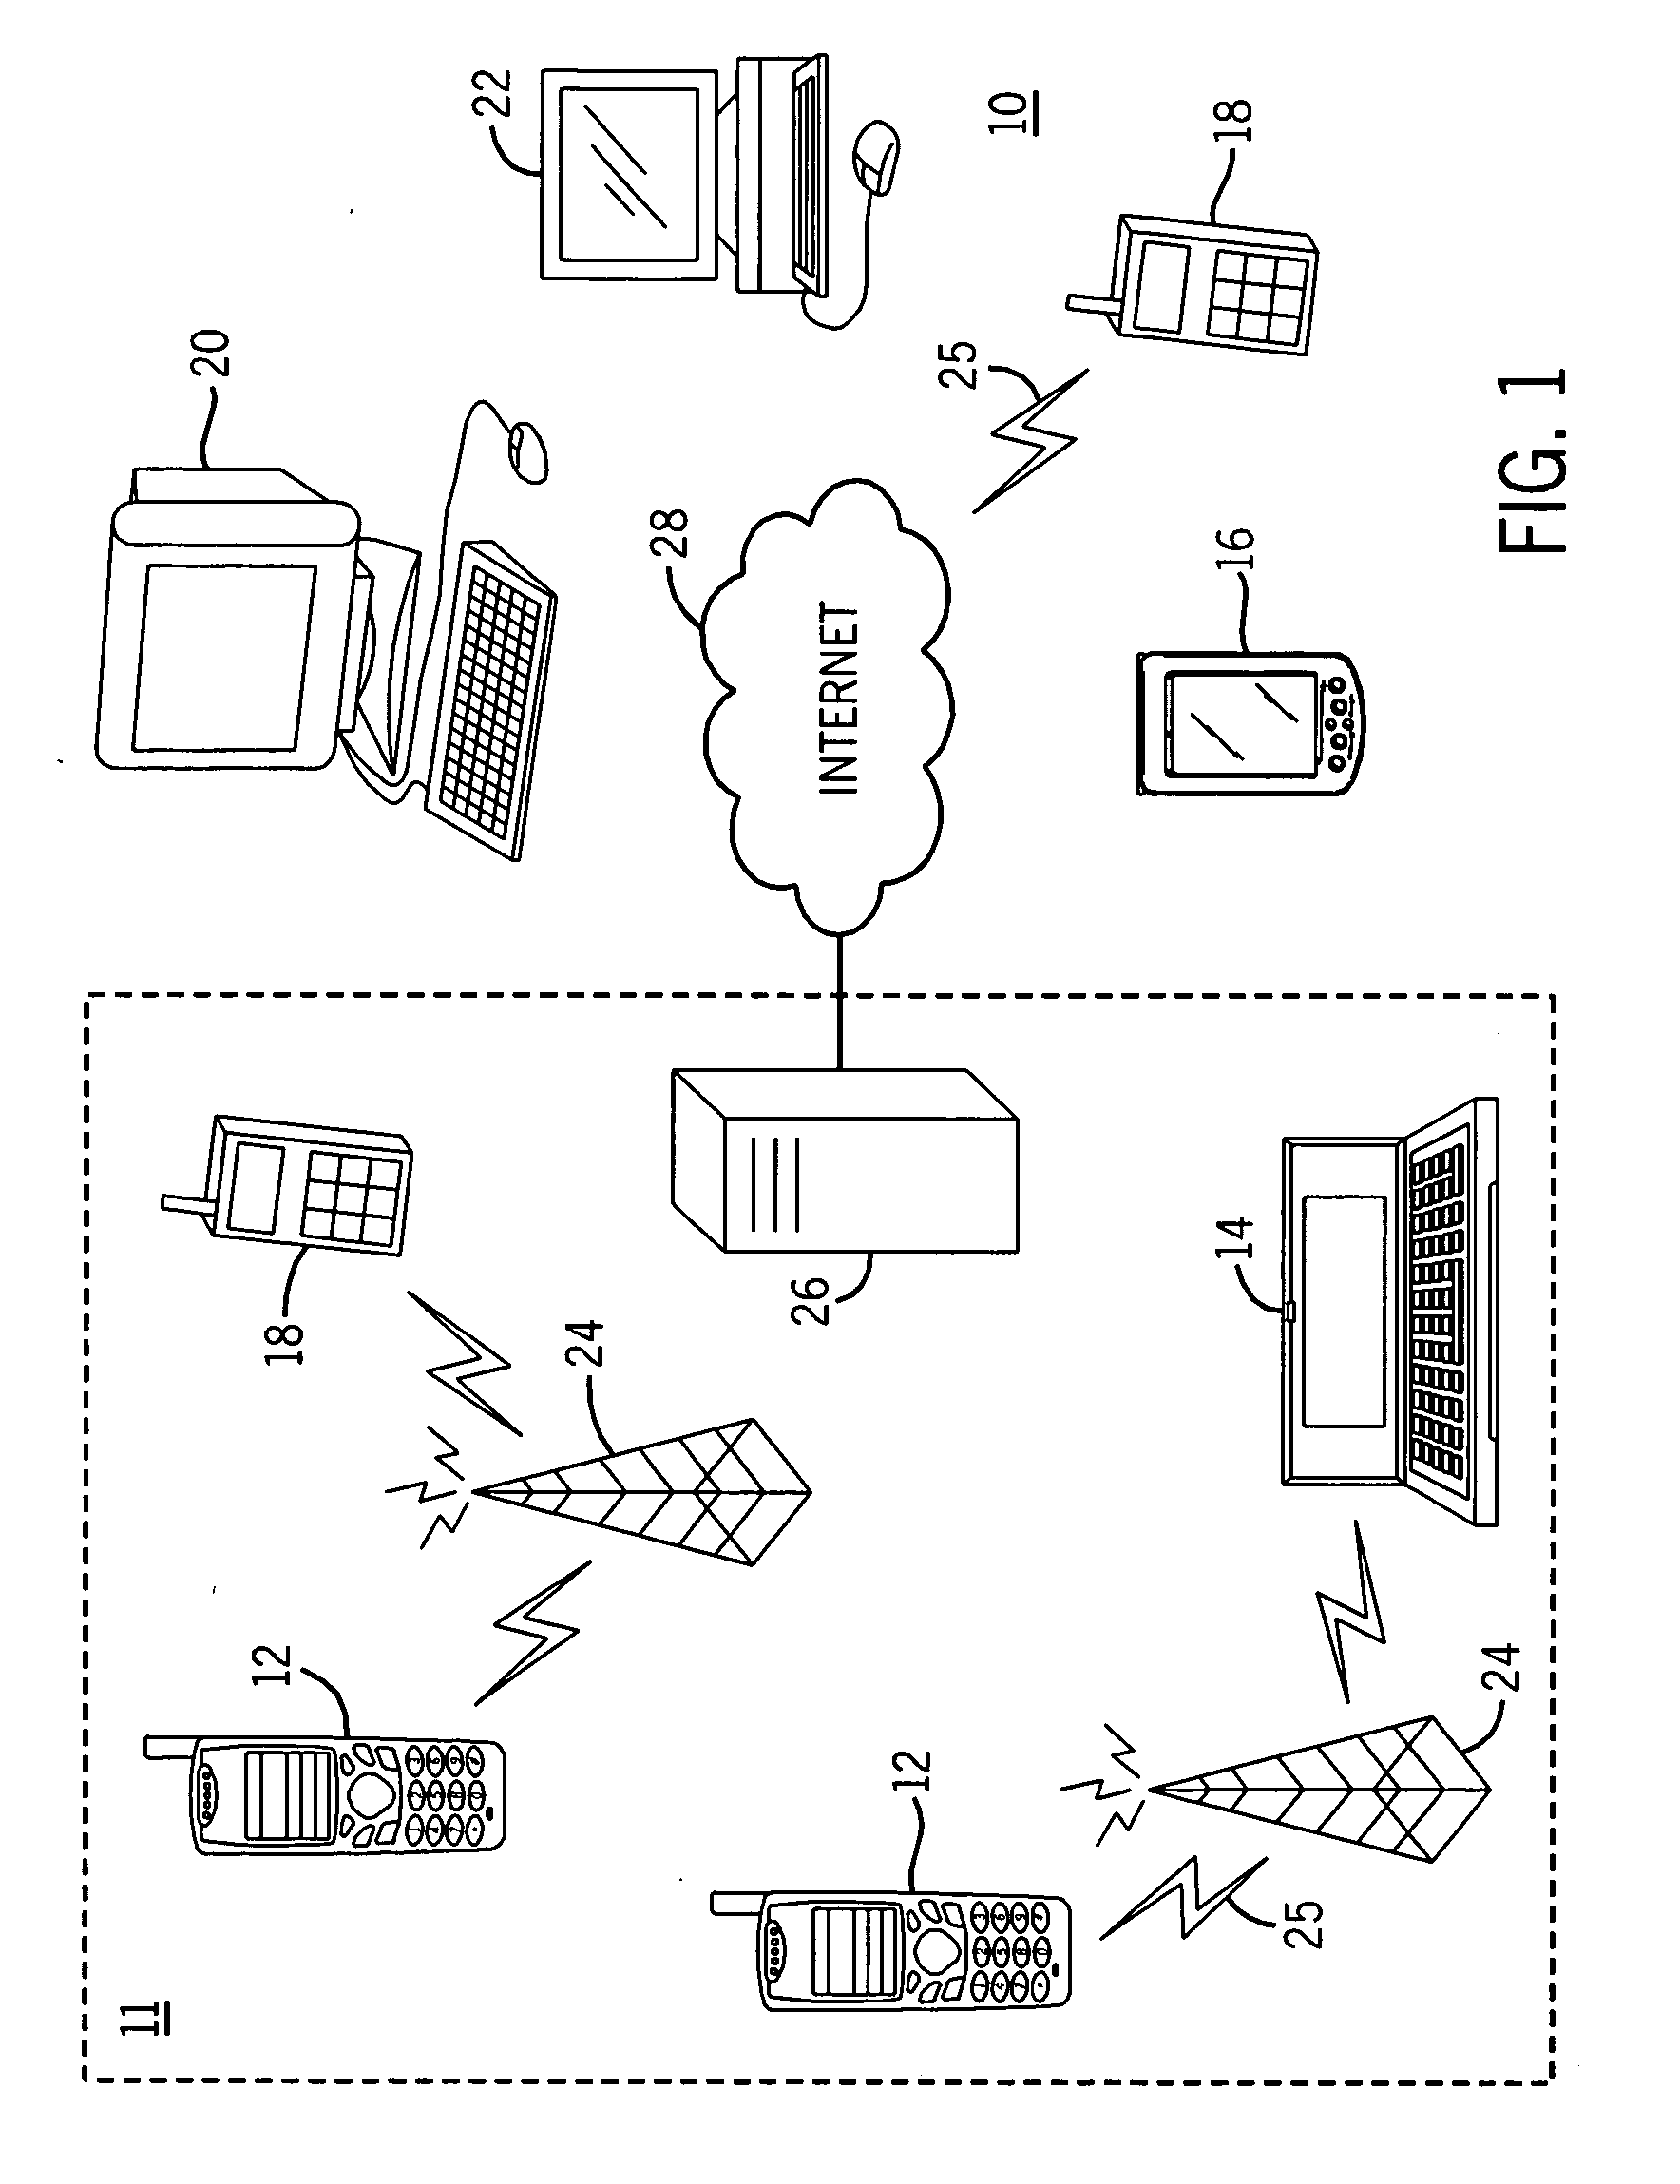 System and method for managing master-slave relationships within a network